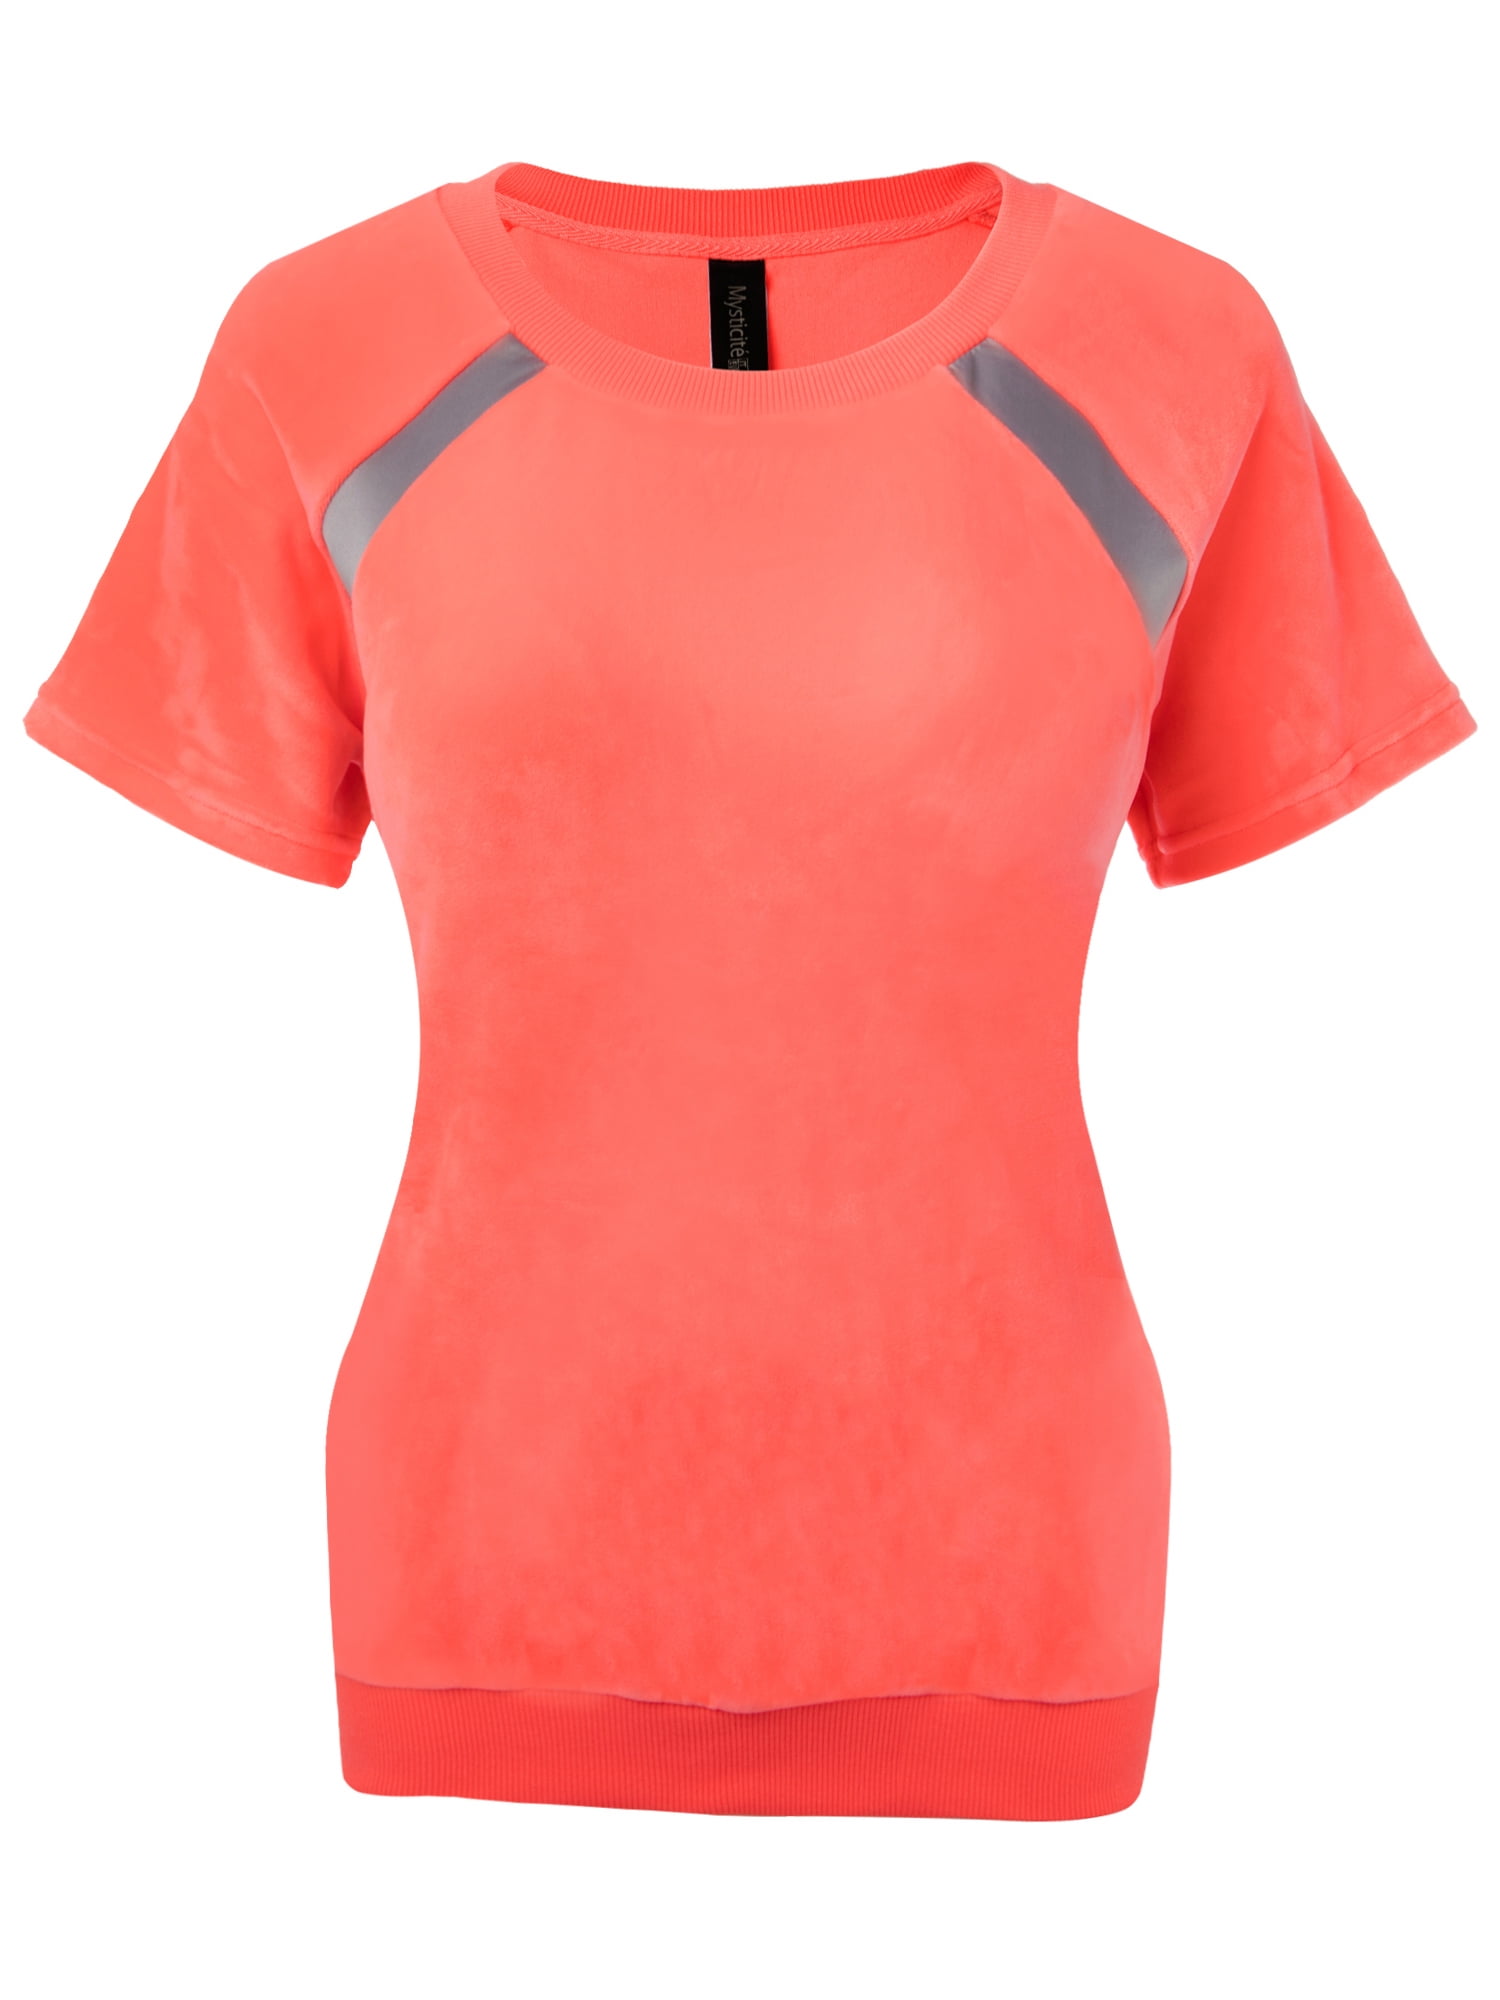 Womens Short Sleeve Yoga Tops Activewear Workout Shirt Quick-Dry Sports Athletic Running Shirts